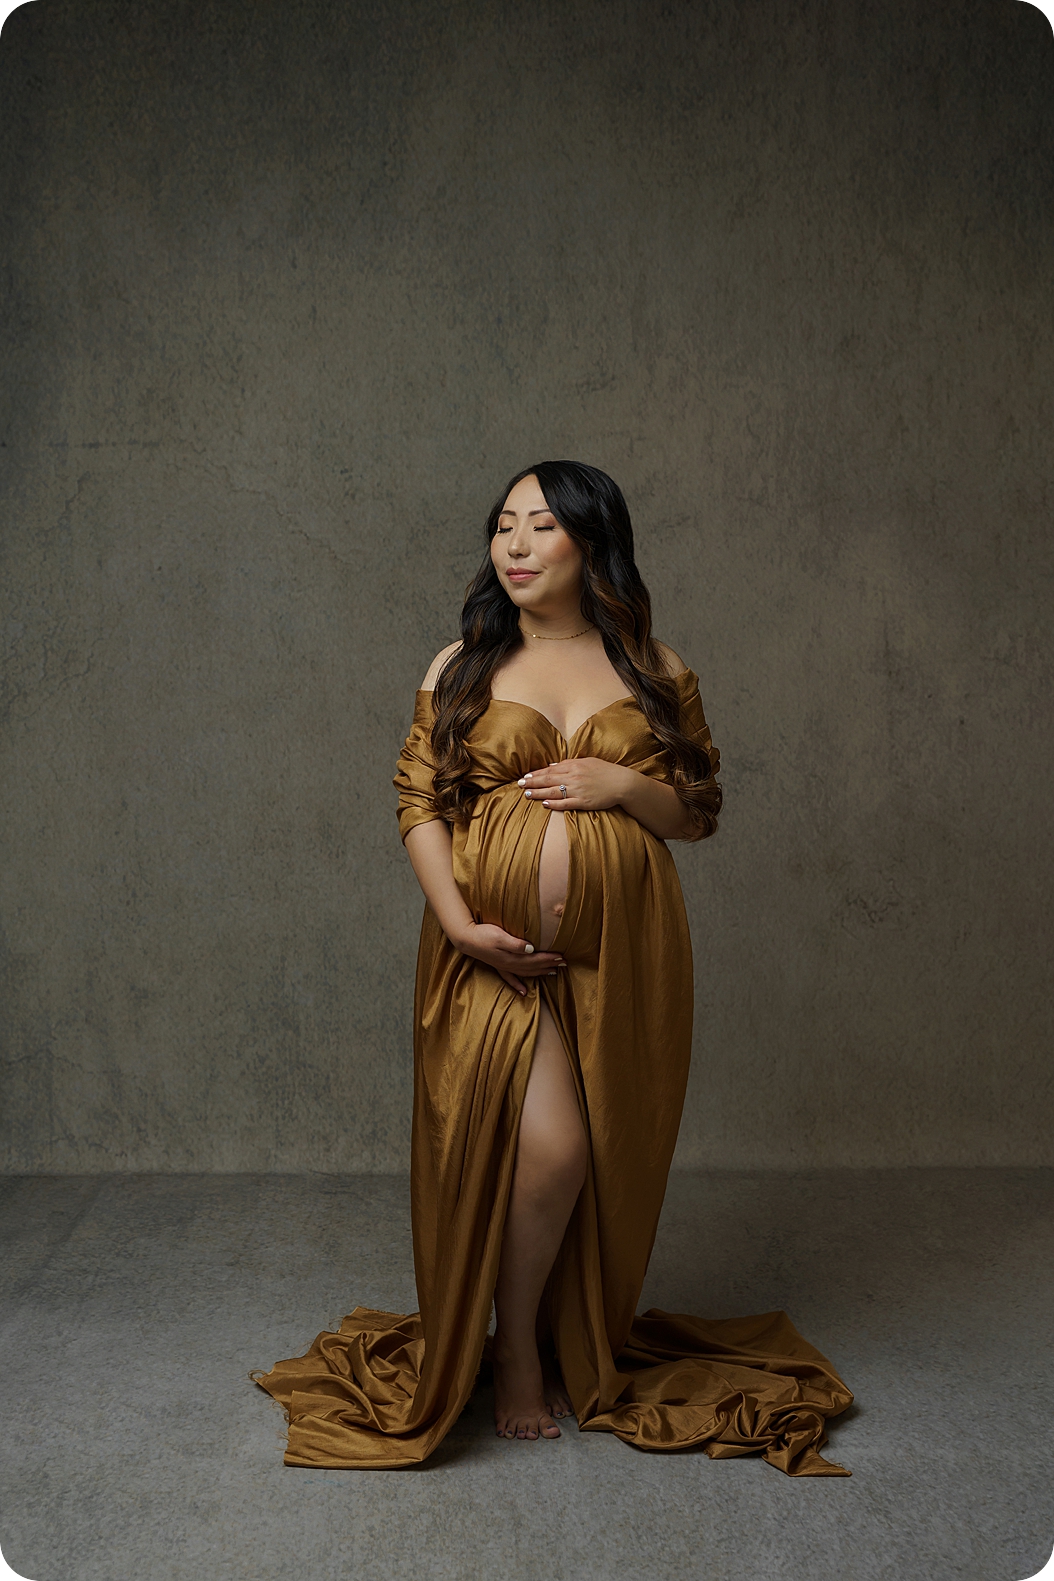 woman poses in studio with gold fabric over belly